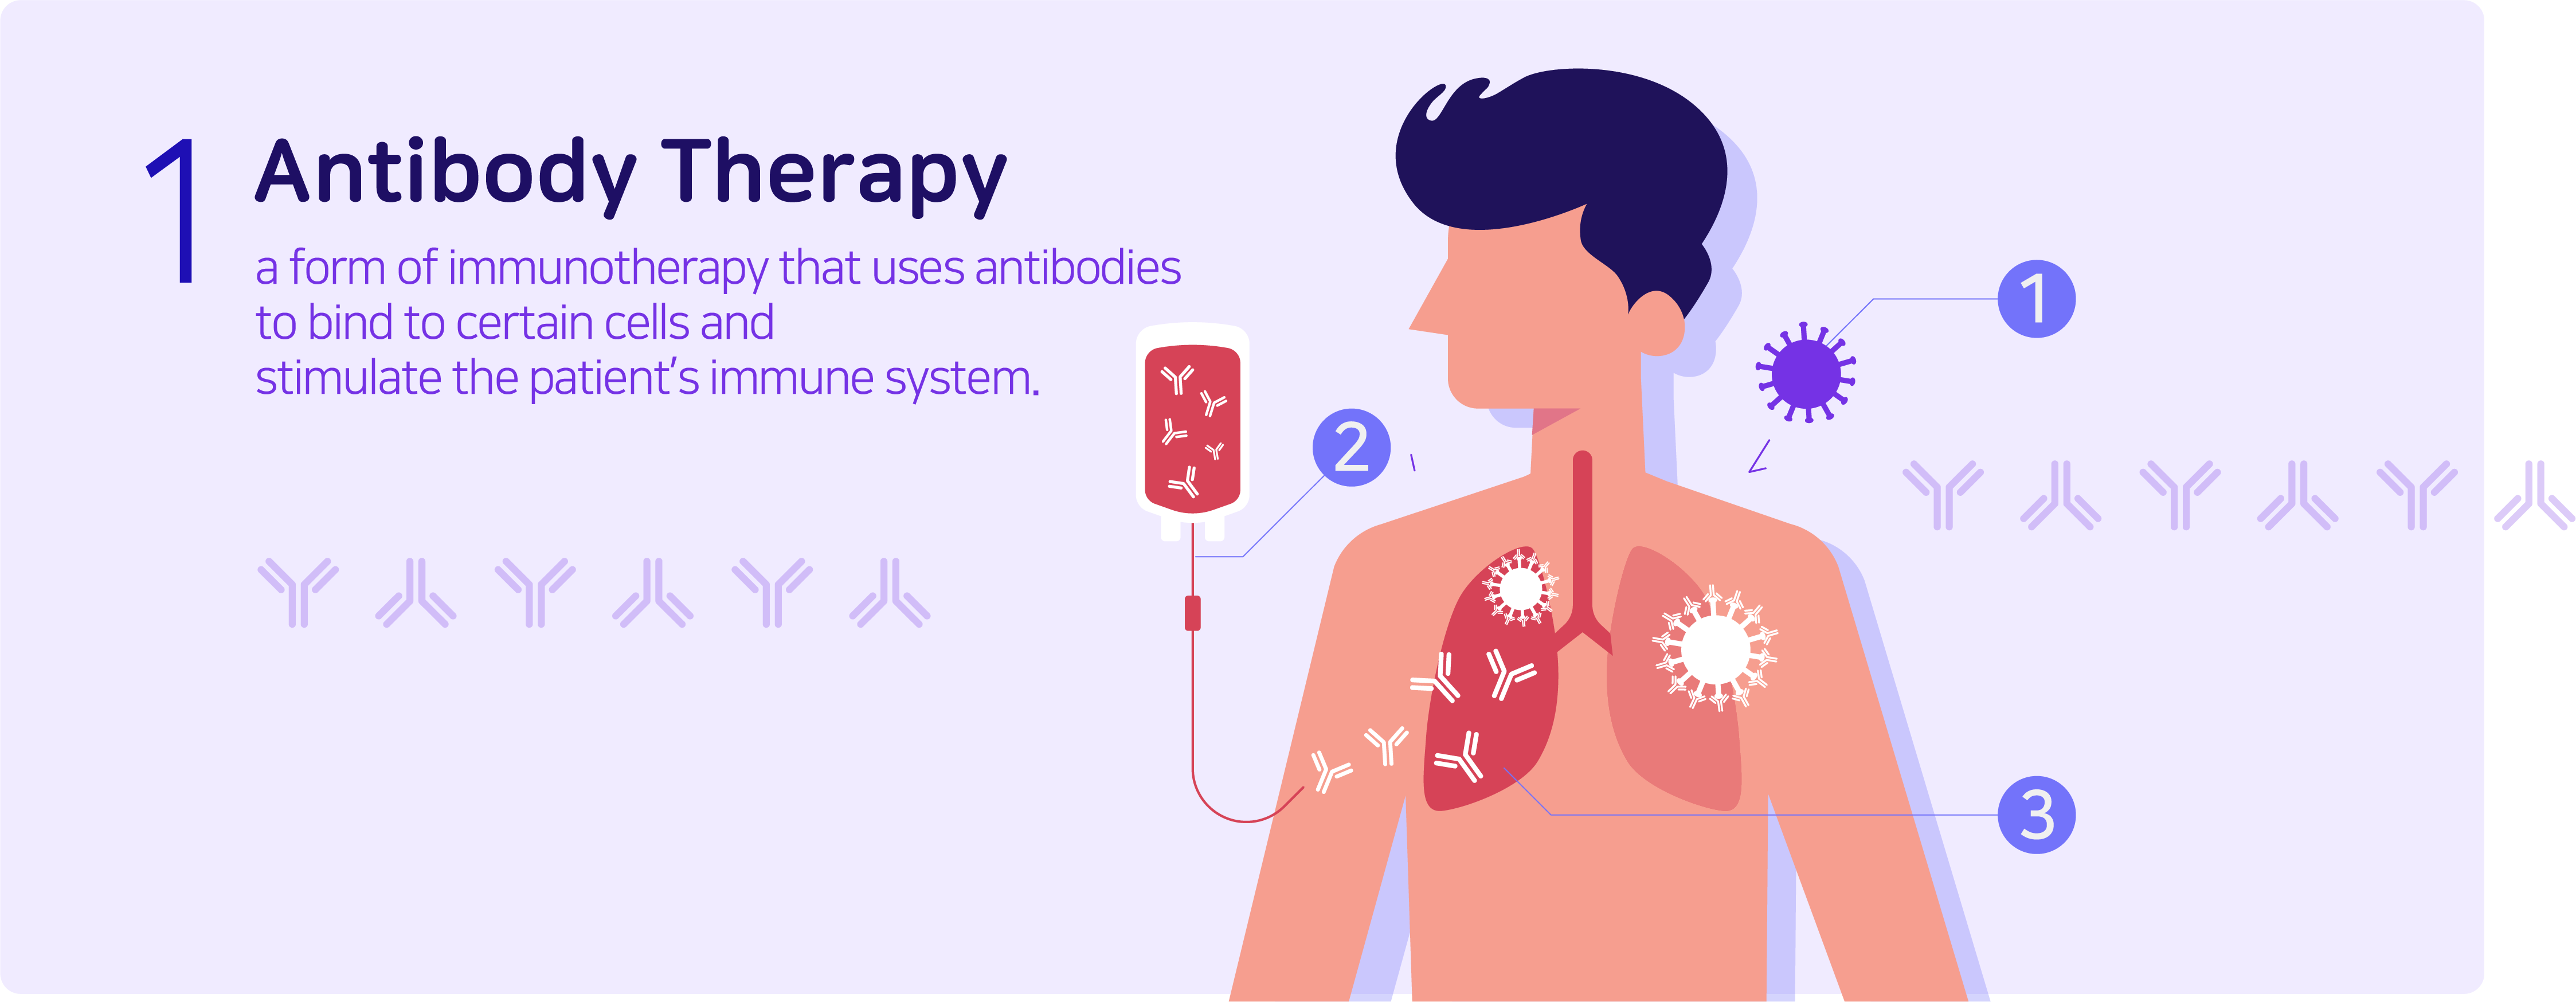 1. Antibody Therapy - a form of immunotherapy that uses antibodies to bind to certain cells and stimulate the patient's immune system.